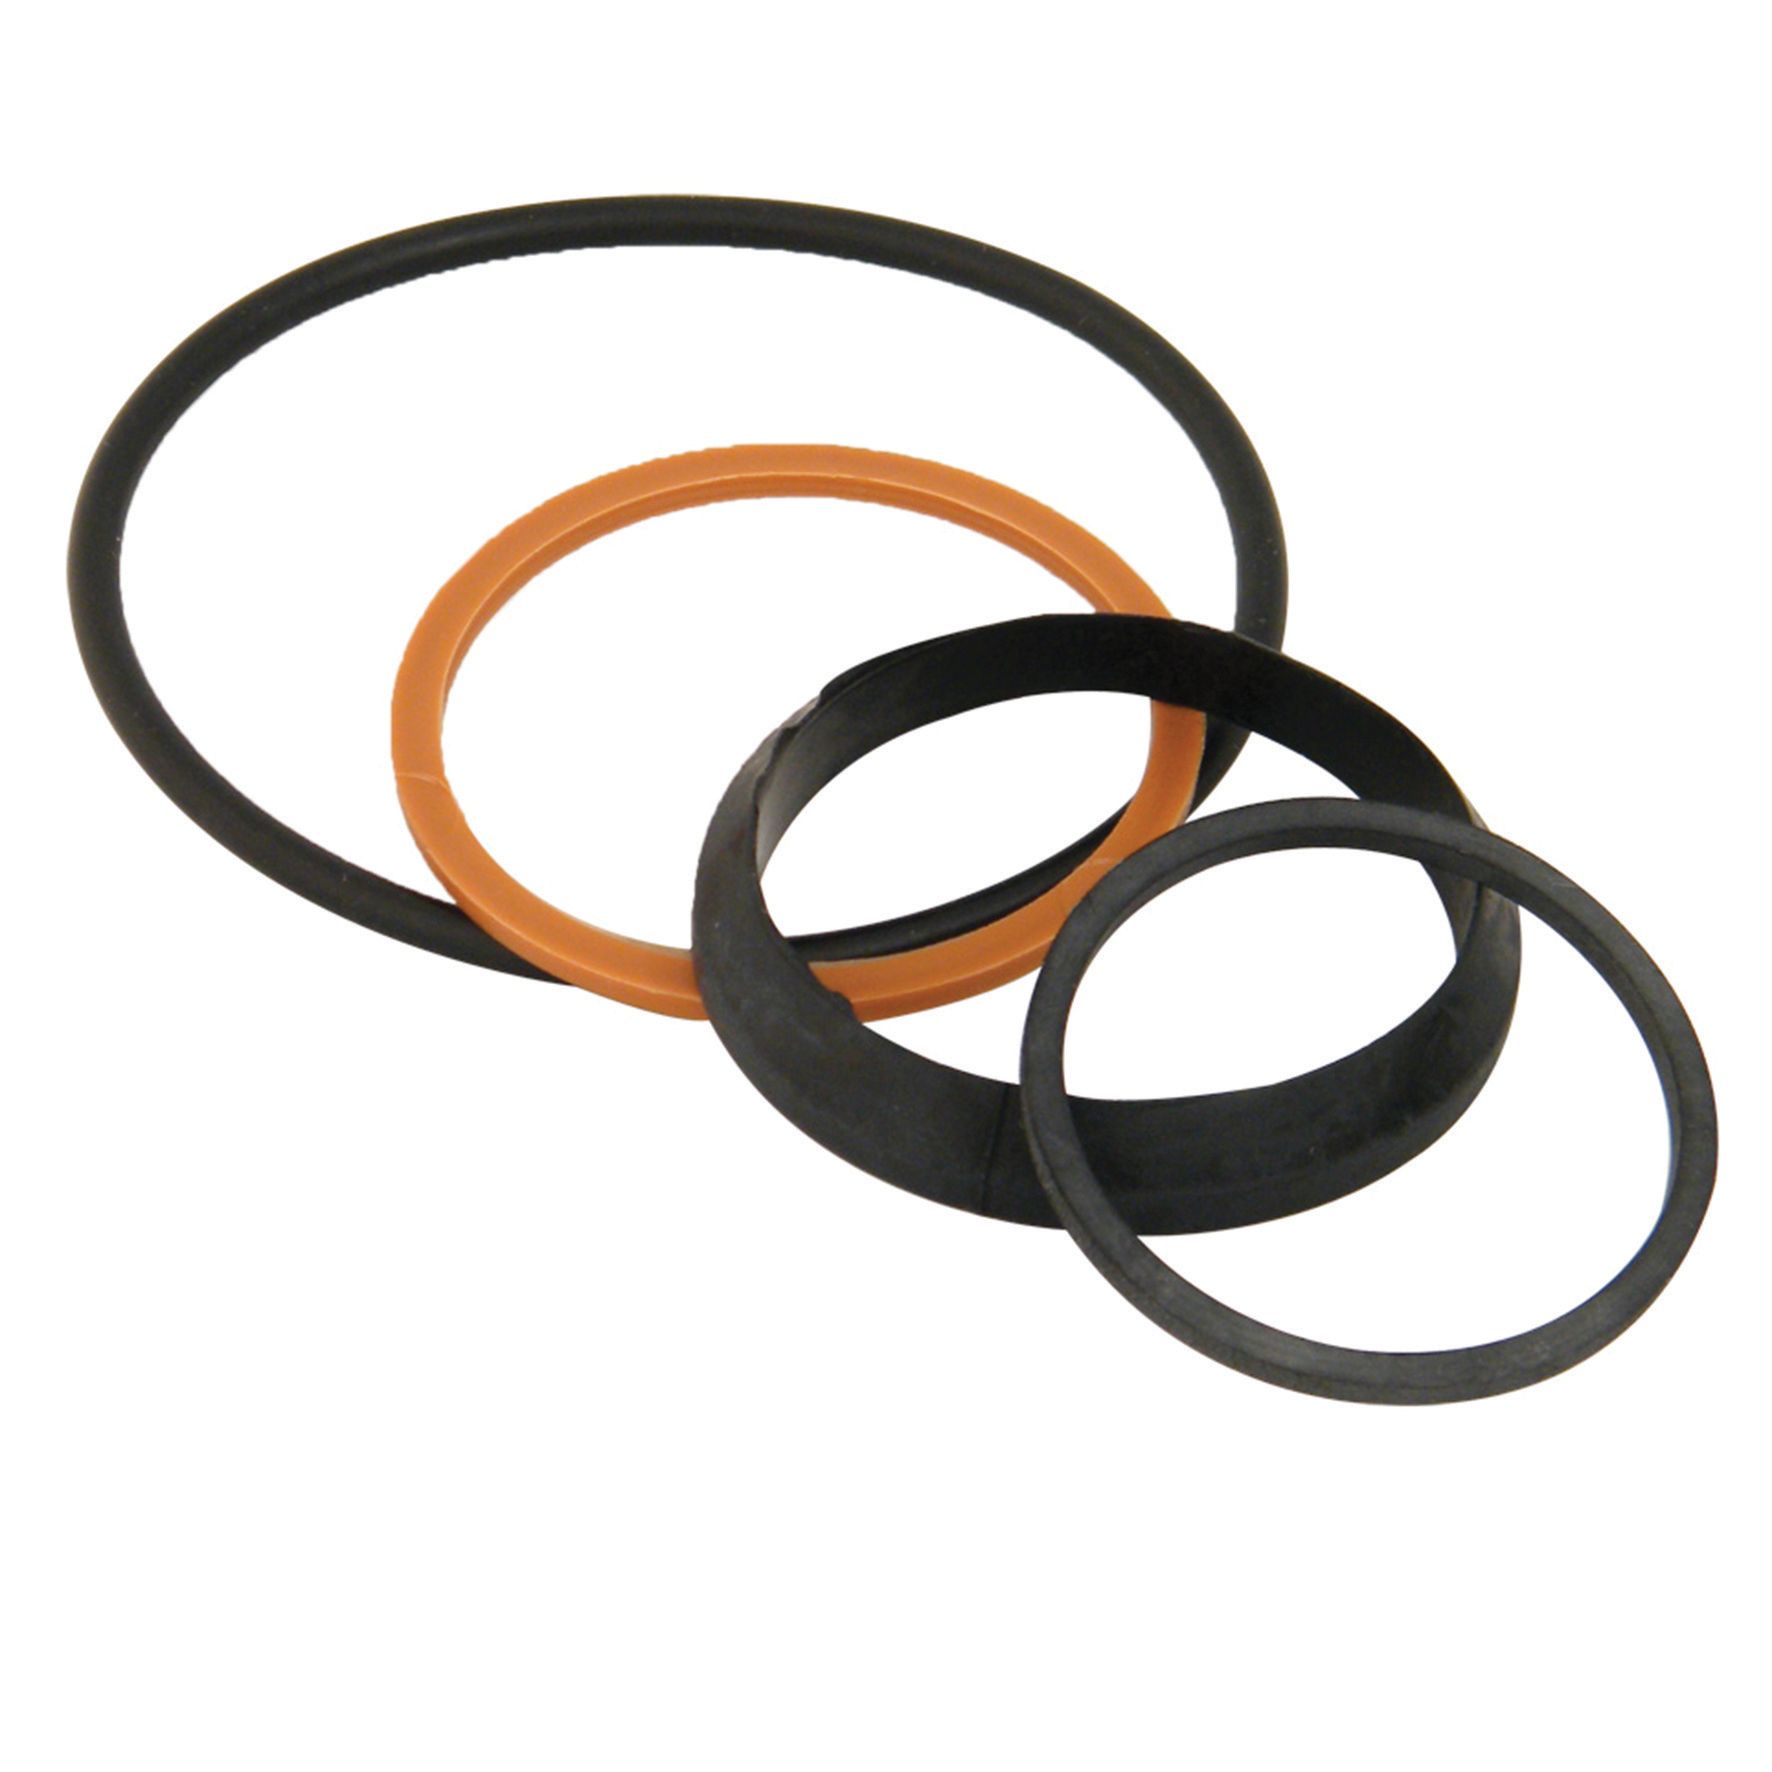 Image of FloPlast TK32 Replacement Trap Seal Kit - 32mm Pack of 4